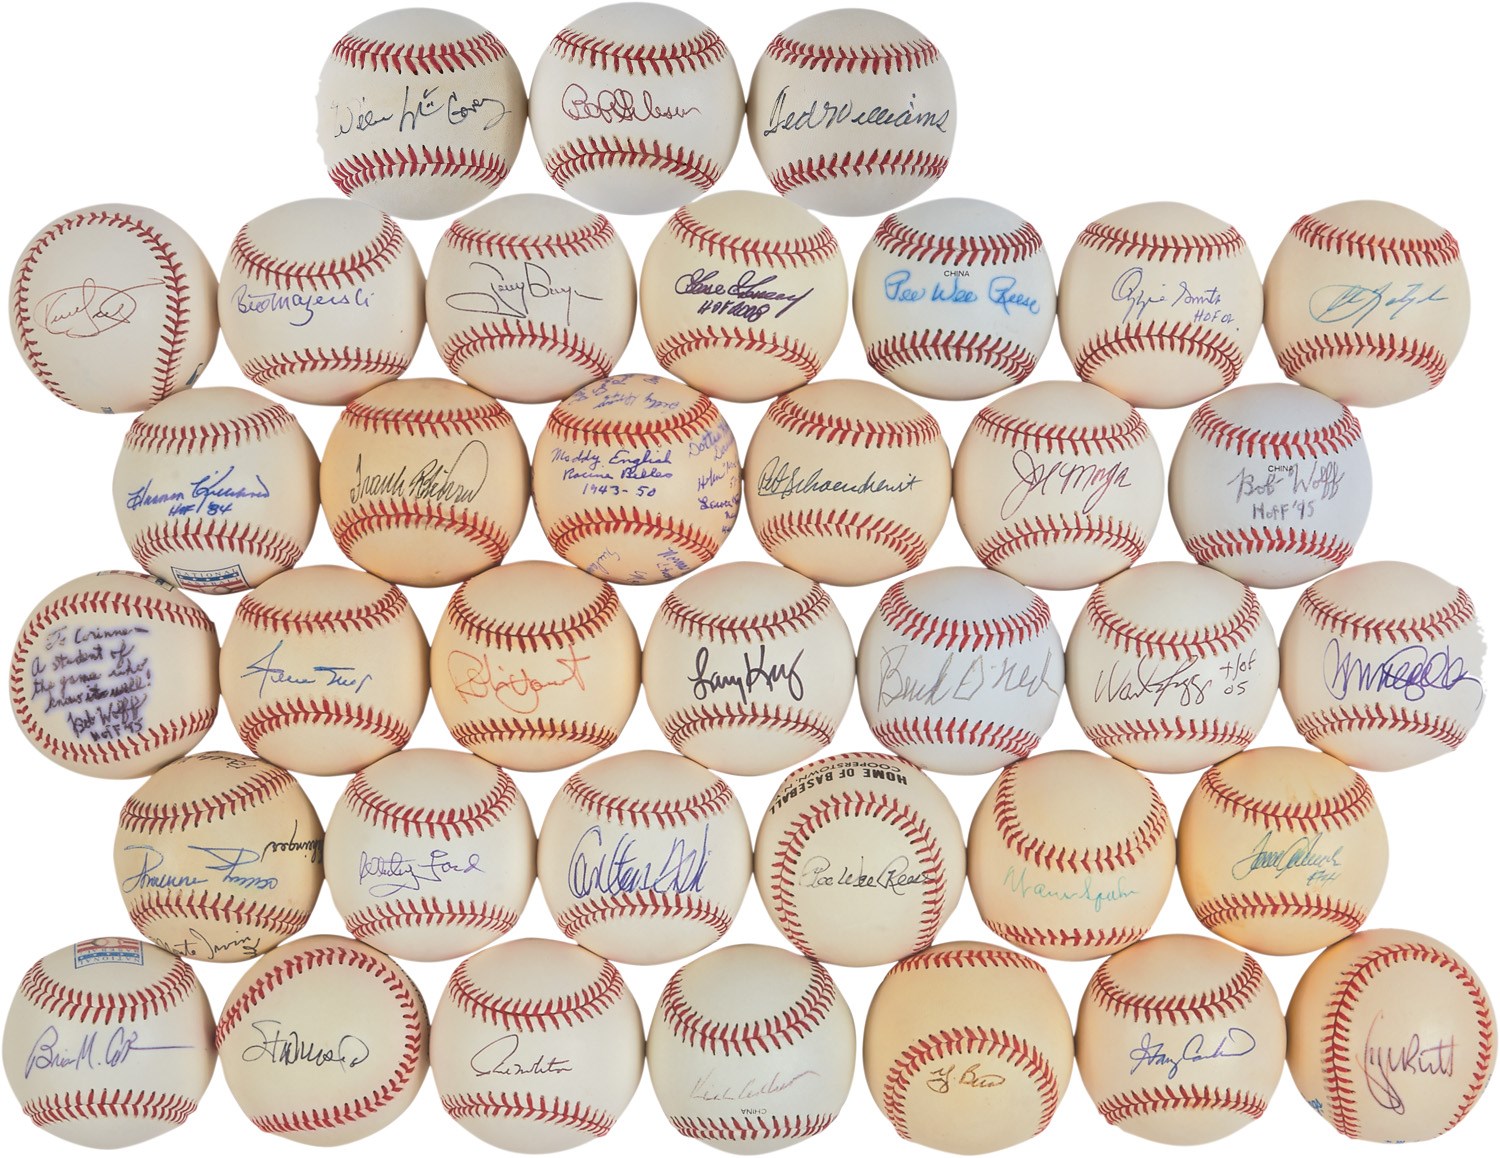 "Hall of Fame" Single-Signed Baseball Collection from Cooperstown Employee (300+)